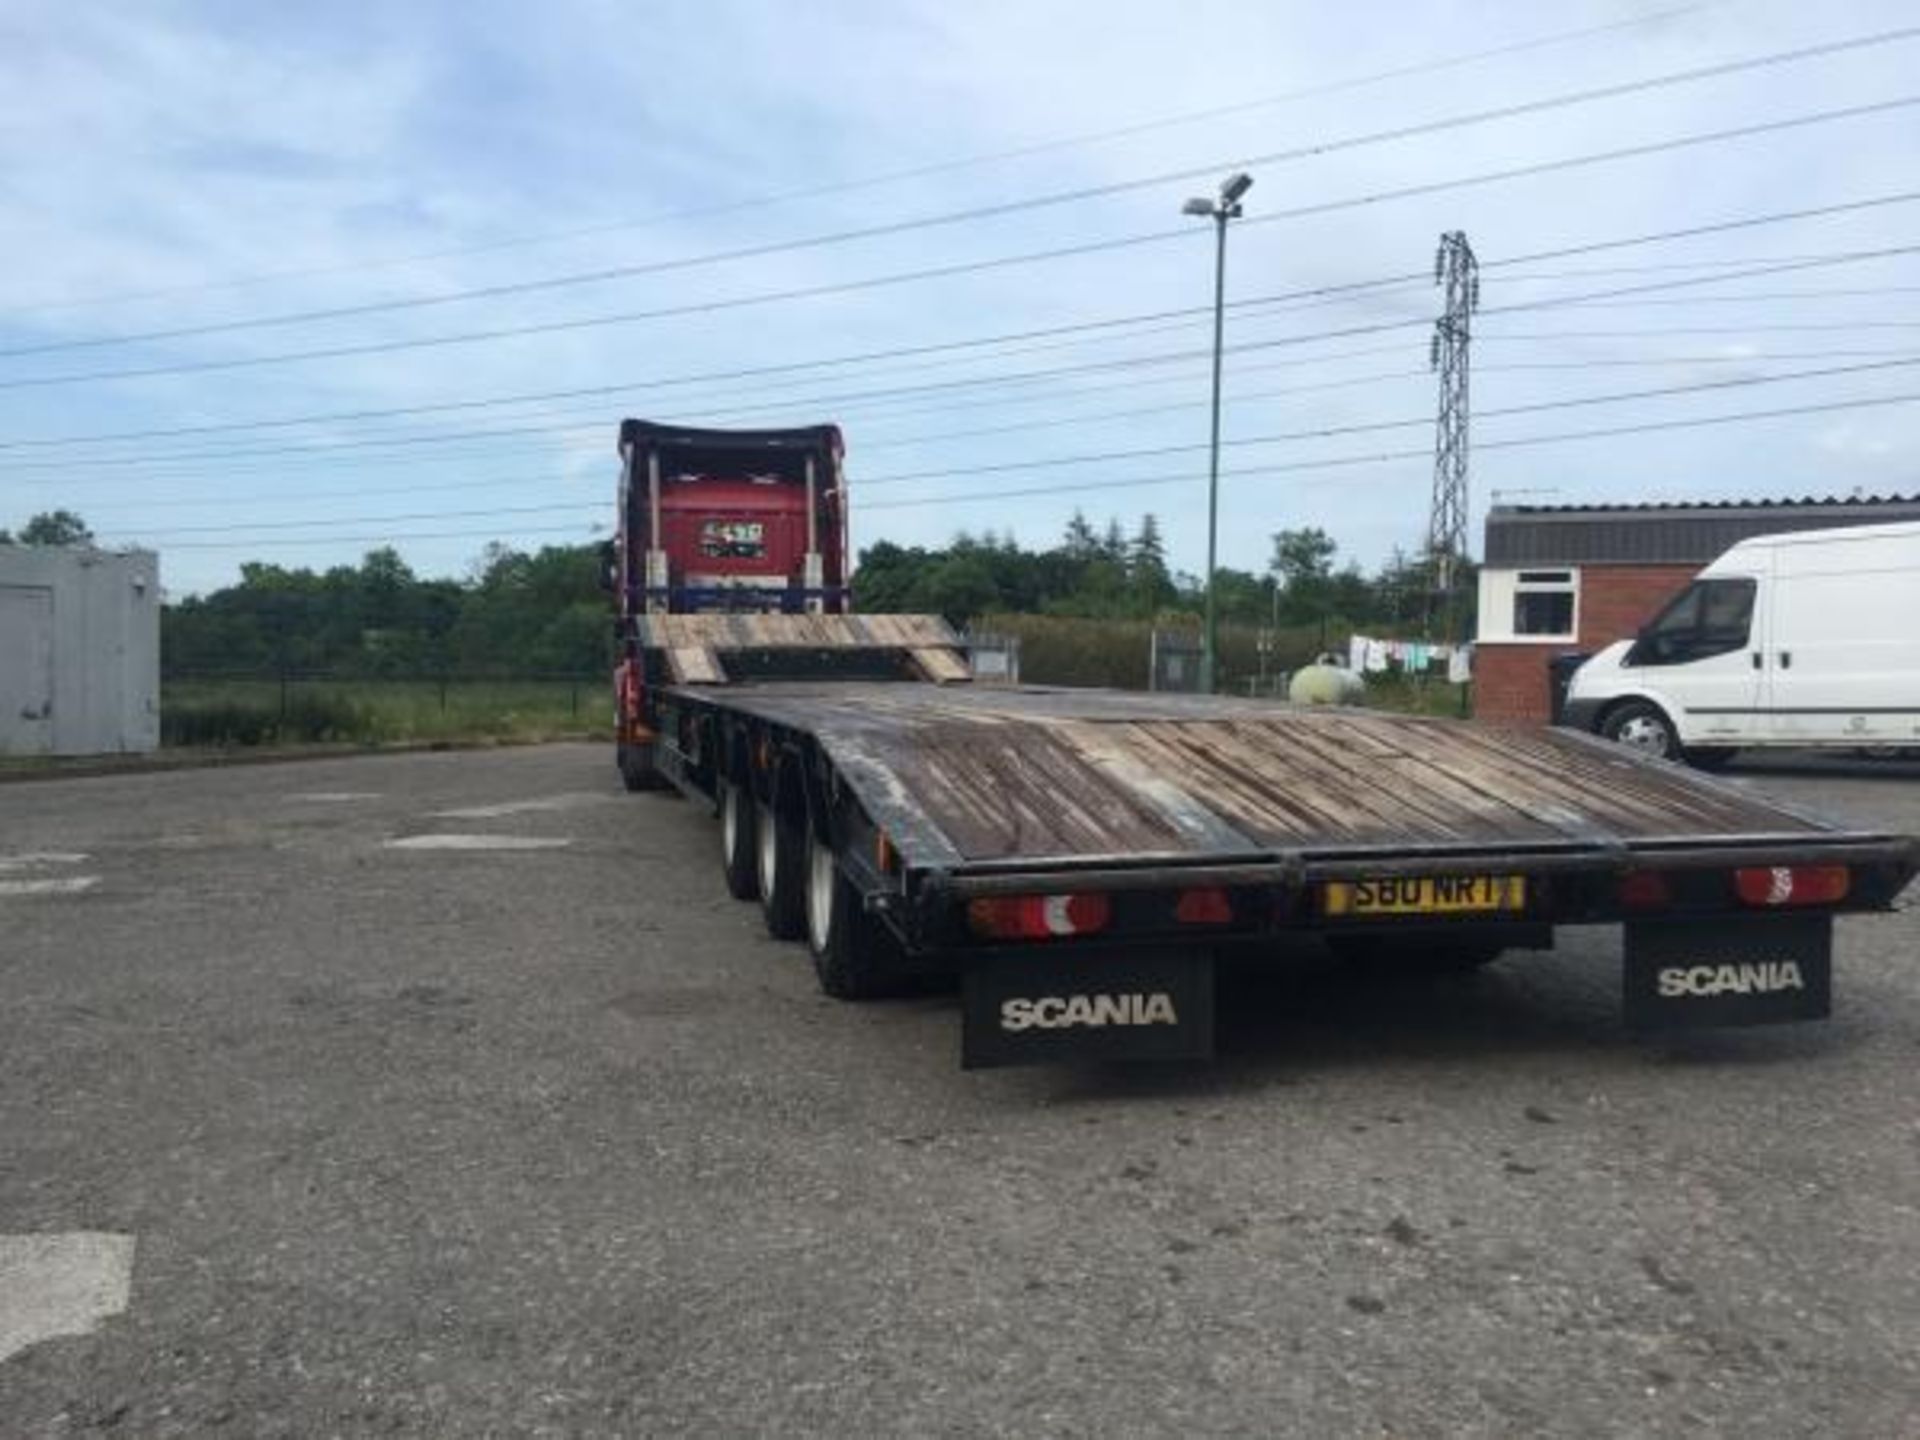 2004 CHIEFTAIN TRI AXLE LOW LOADER TRAILER, GOOD CONDITION, ALLOY RAMPS, AIR SUSPENSION *PLUS VAT* - Image 4 of 12